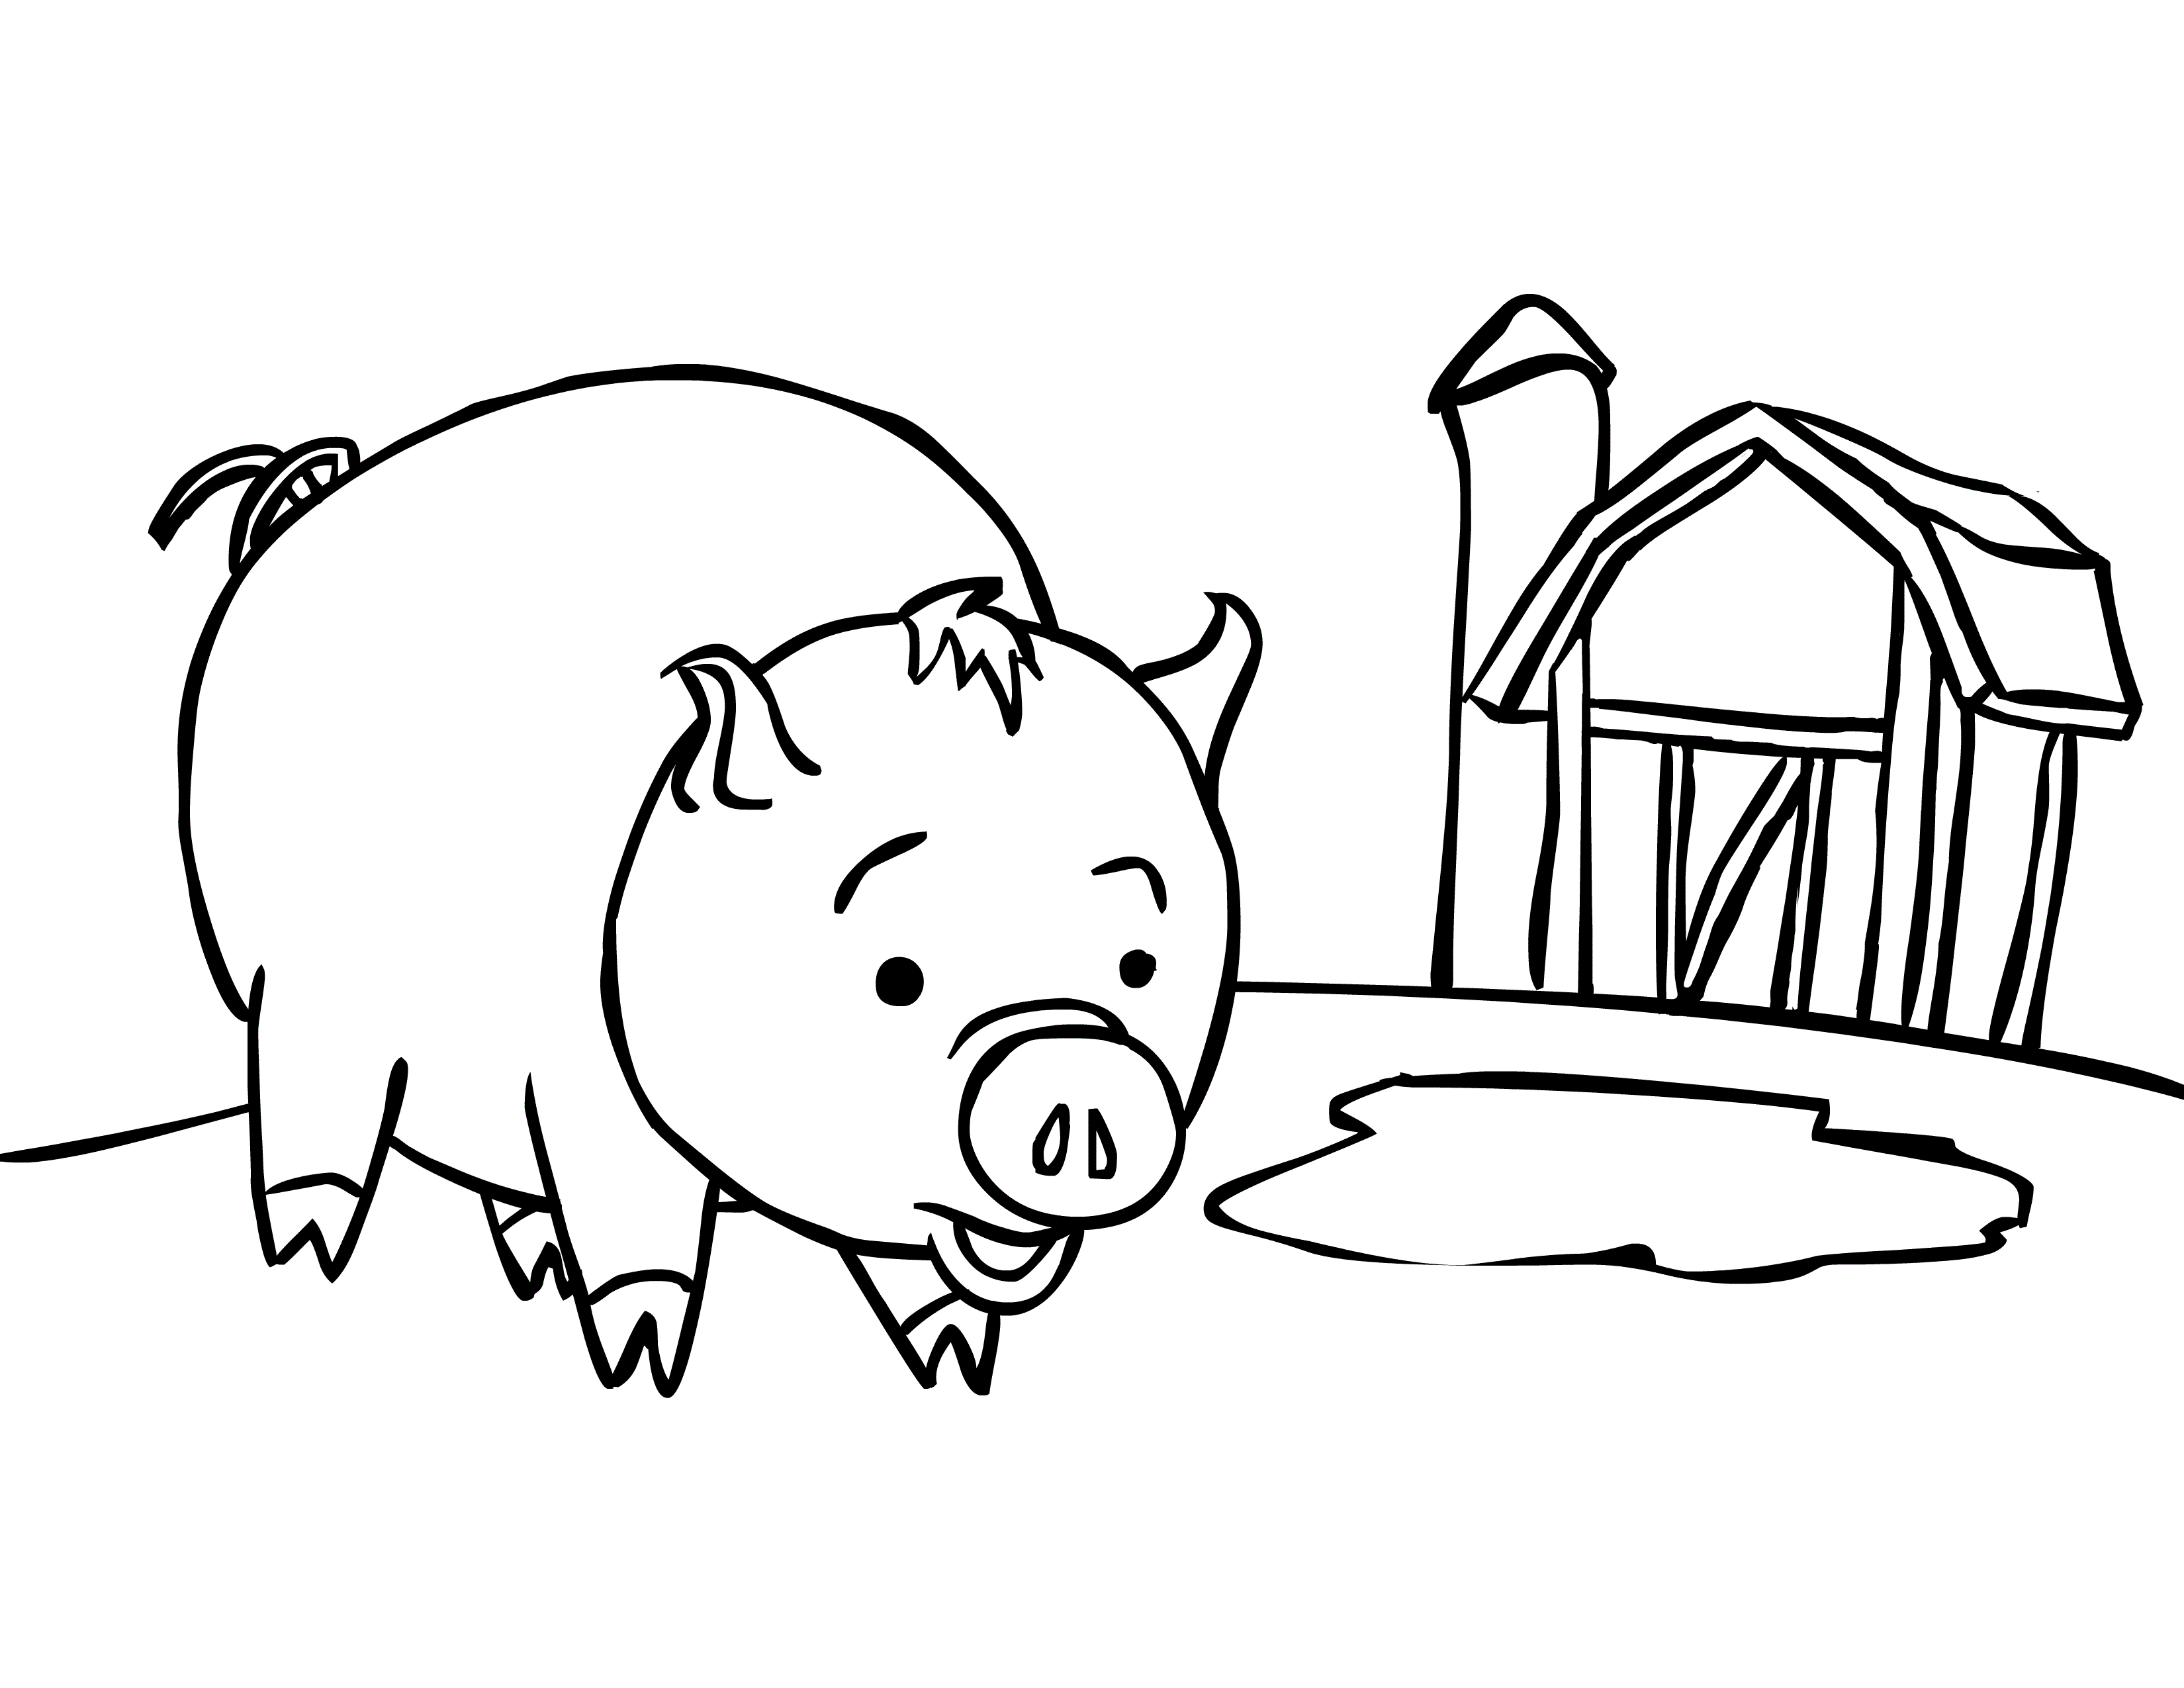 100 free printable Peppa Pig coloring pages in vector format, easy to print  from any device and automati… | Peppa pig coloring pages, Peppa pig  colouring, Peppa pig